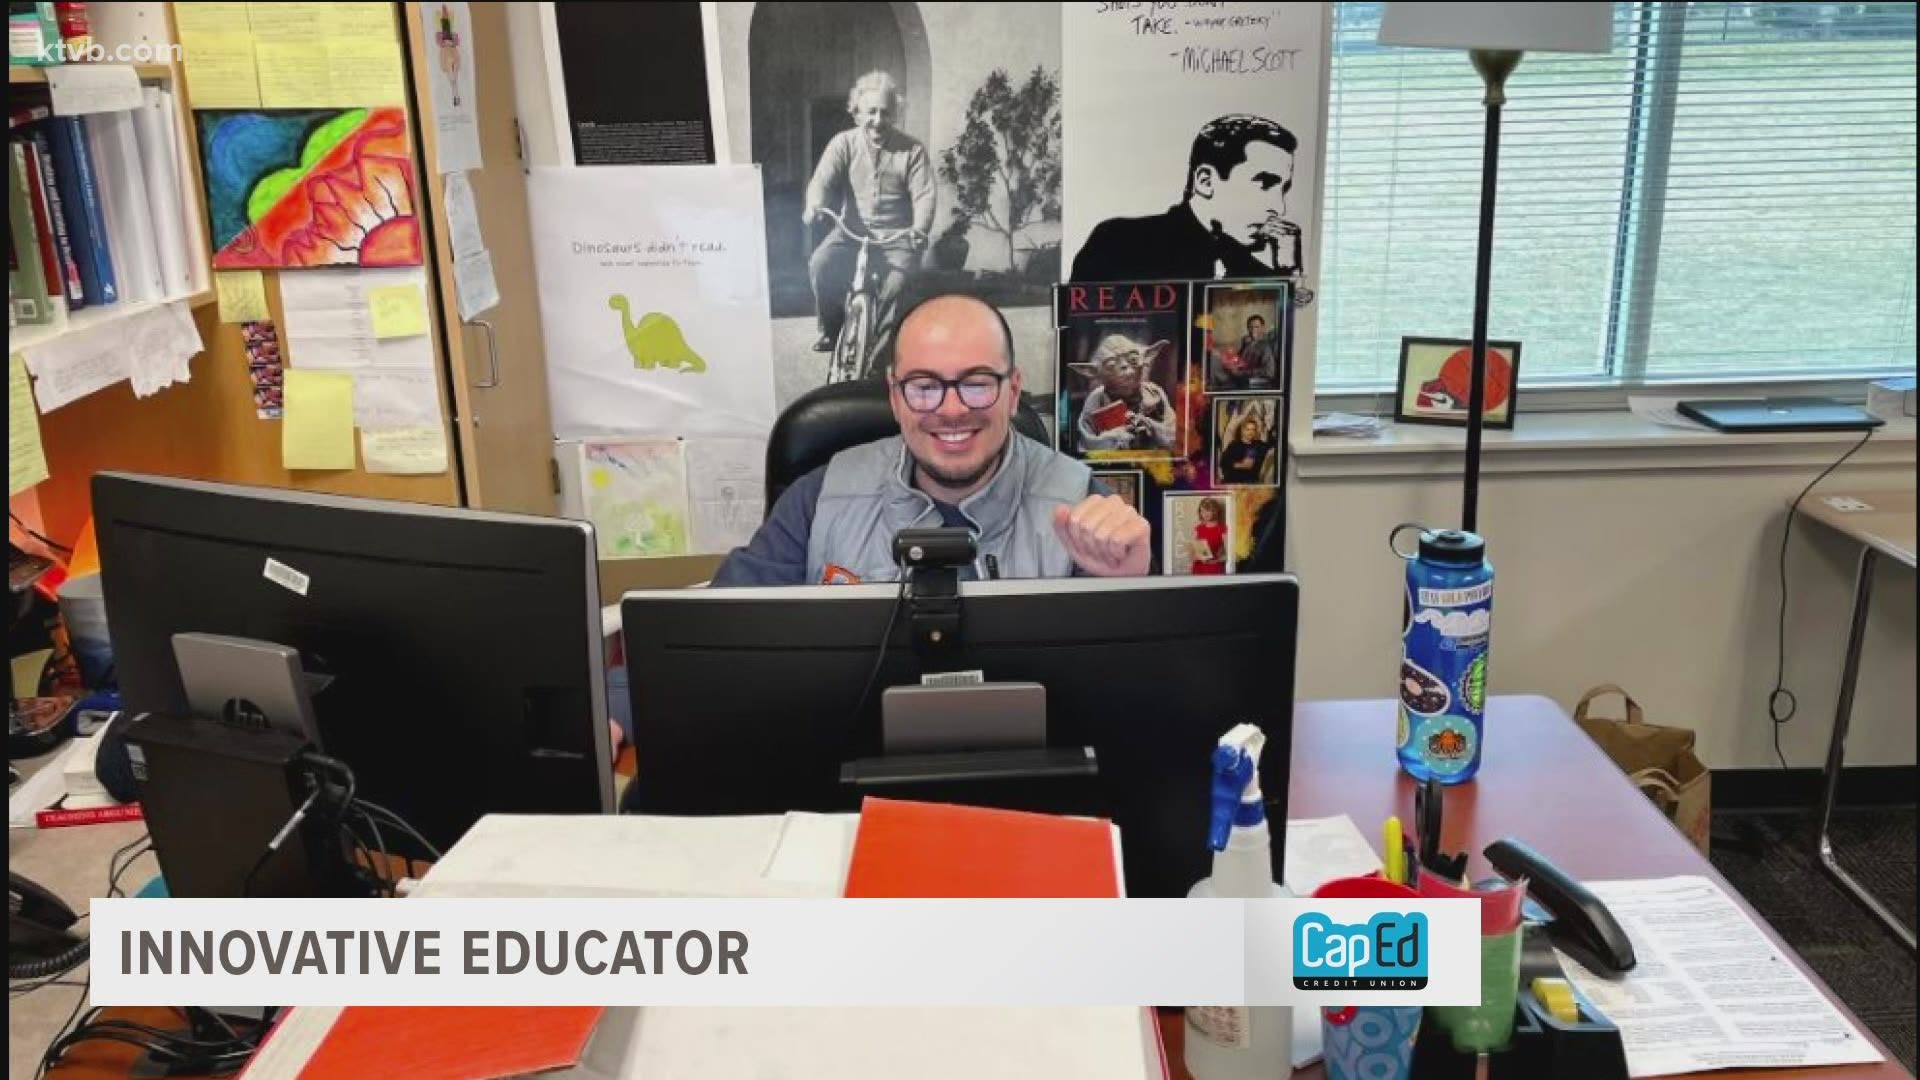 Boise teacher Justin Mings improved student engagement by creating theme days, including Meme Mondays, Weird Fact Wednesdays and Funny Fridays.